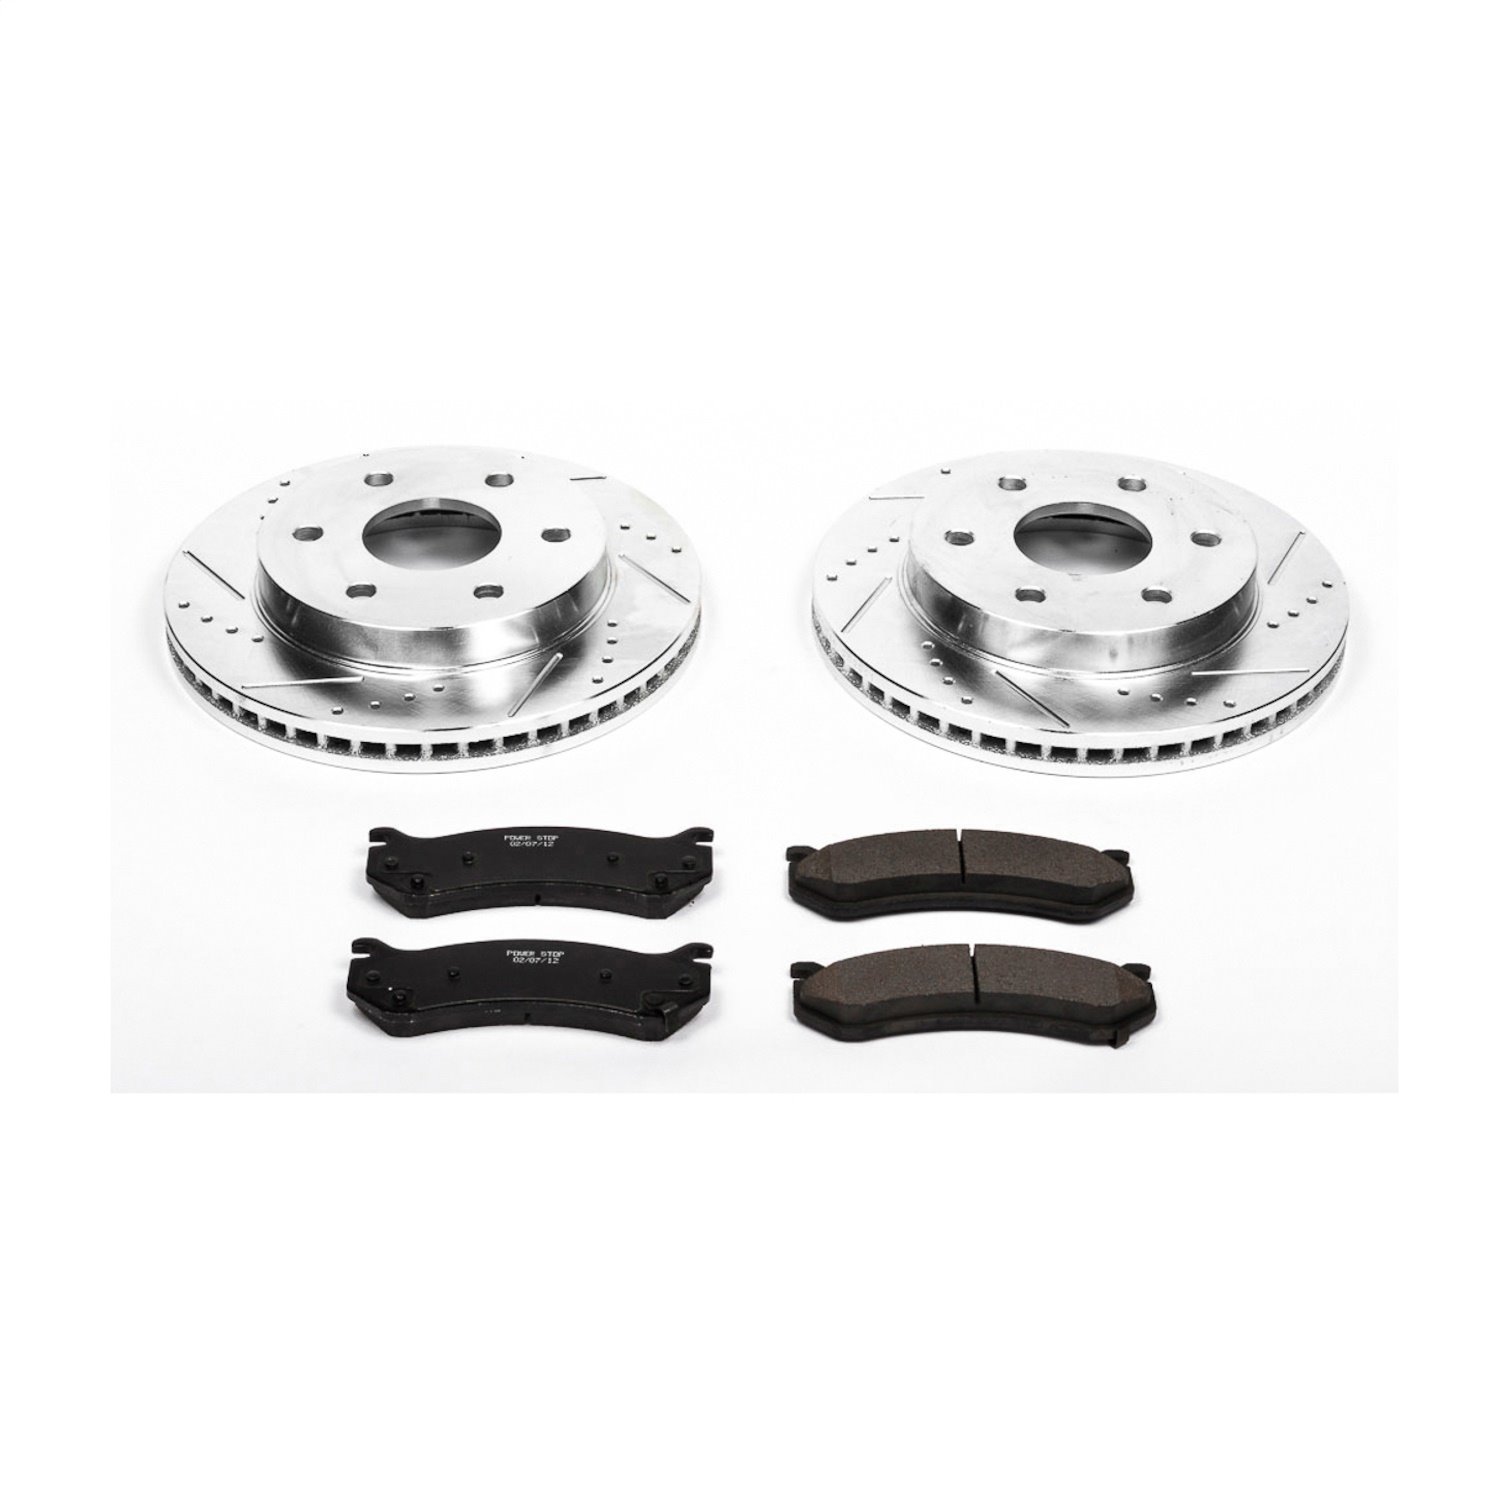 Z23 Evolution Brake Kit for Chevy, Cadillac and GMC